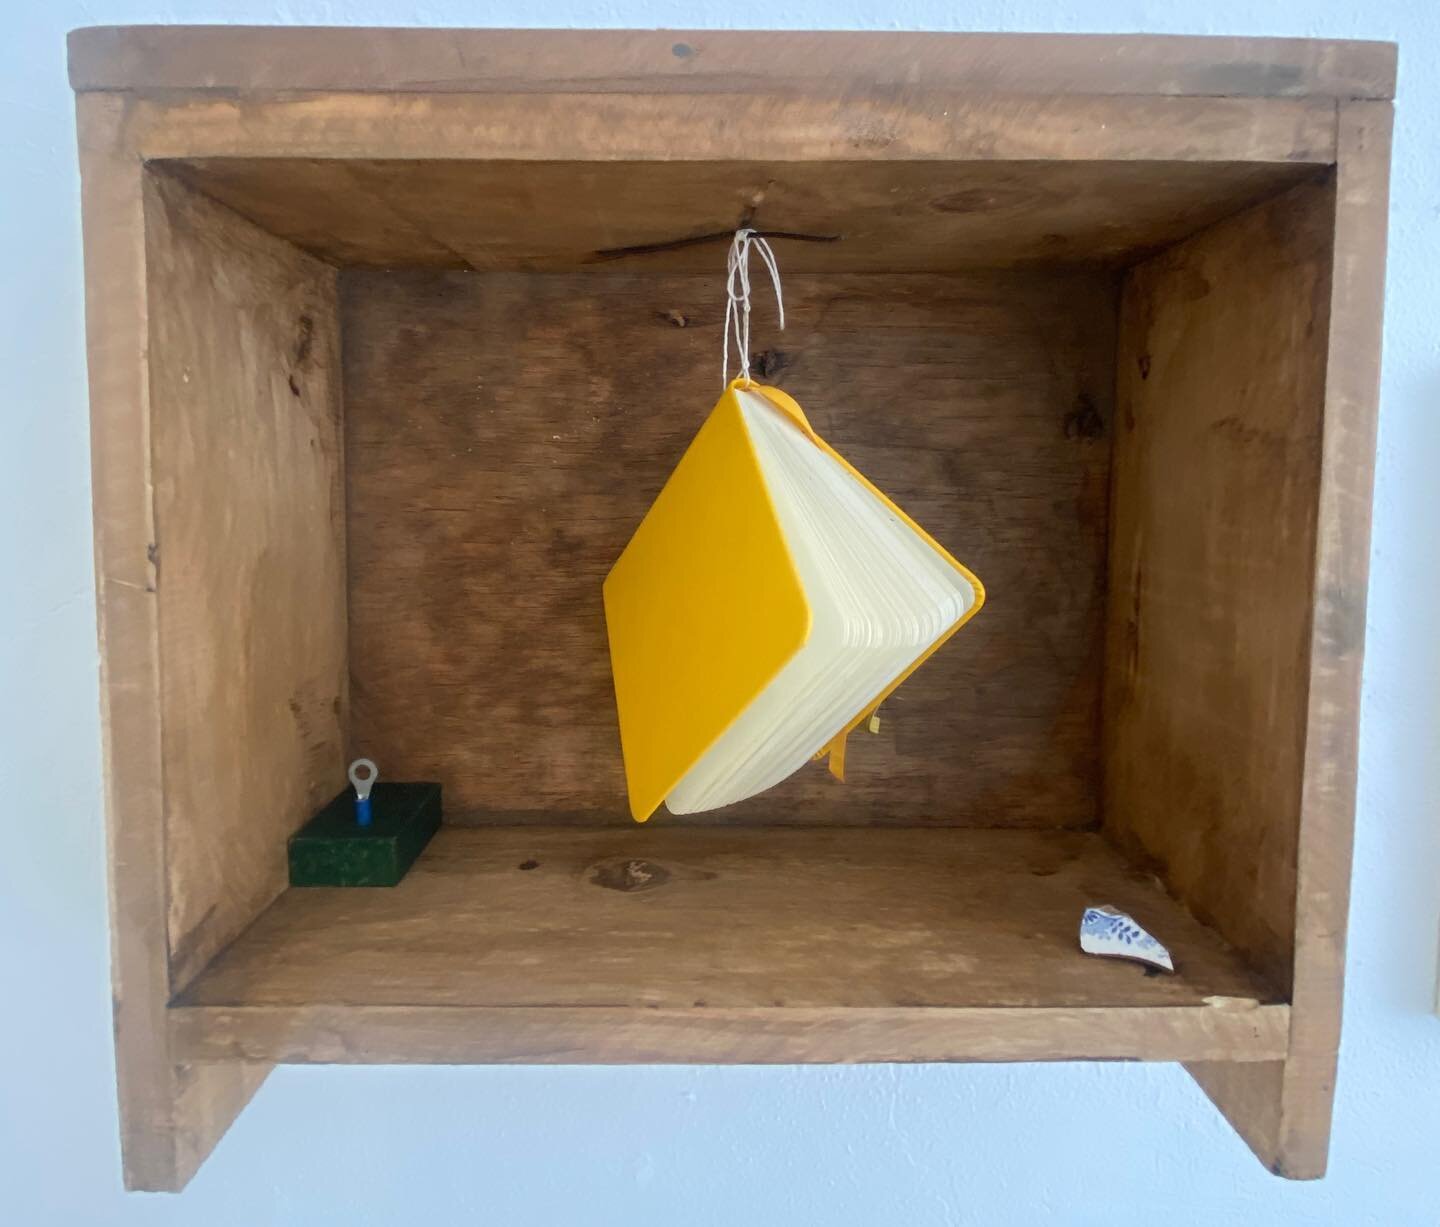 Steven Dayvid McKellar, 2023, &ldquo; Lemon Tree&rdquo;, assemblage with sketchbook, objects and paint, w: 14 x d: 6 x h: 15 inches, currently on view on the exhibition &ldquo;Nooit ge Dacht&rdquo; at El Nido by VC Projects.

The exhibition is an exp